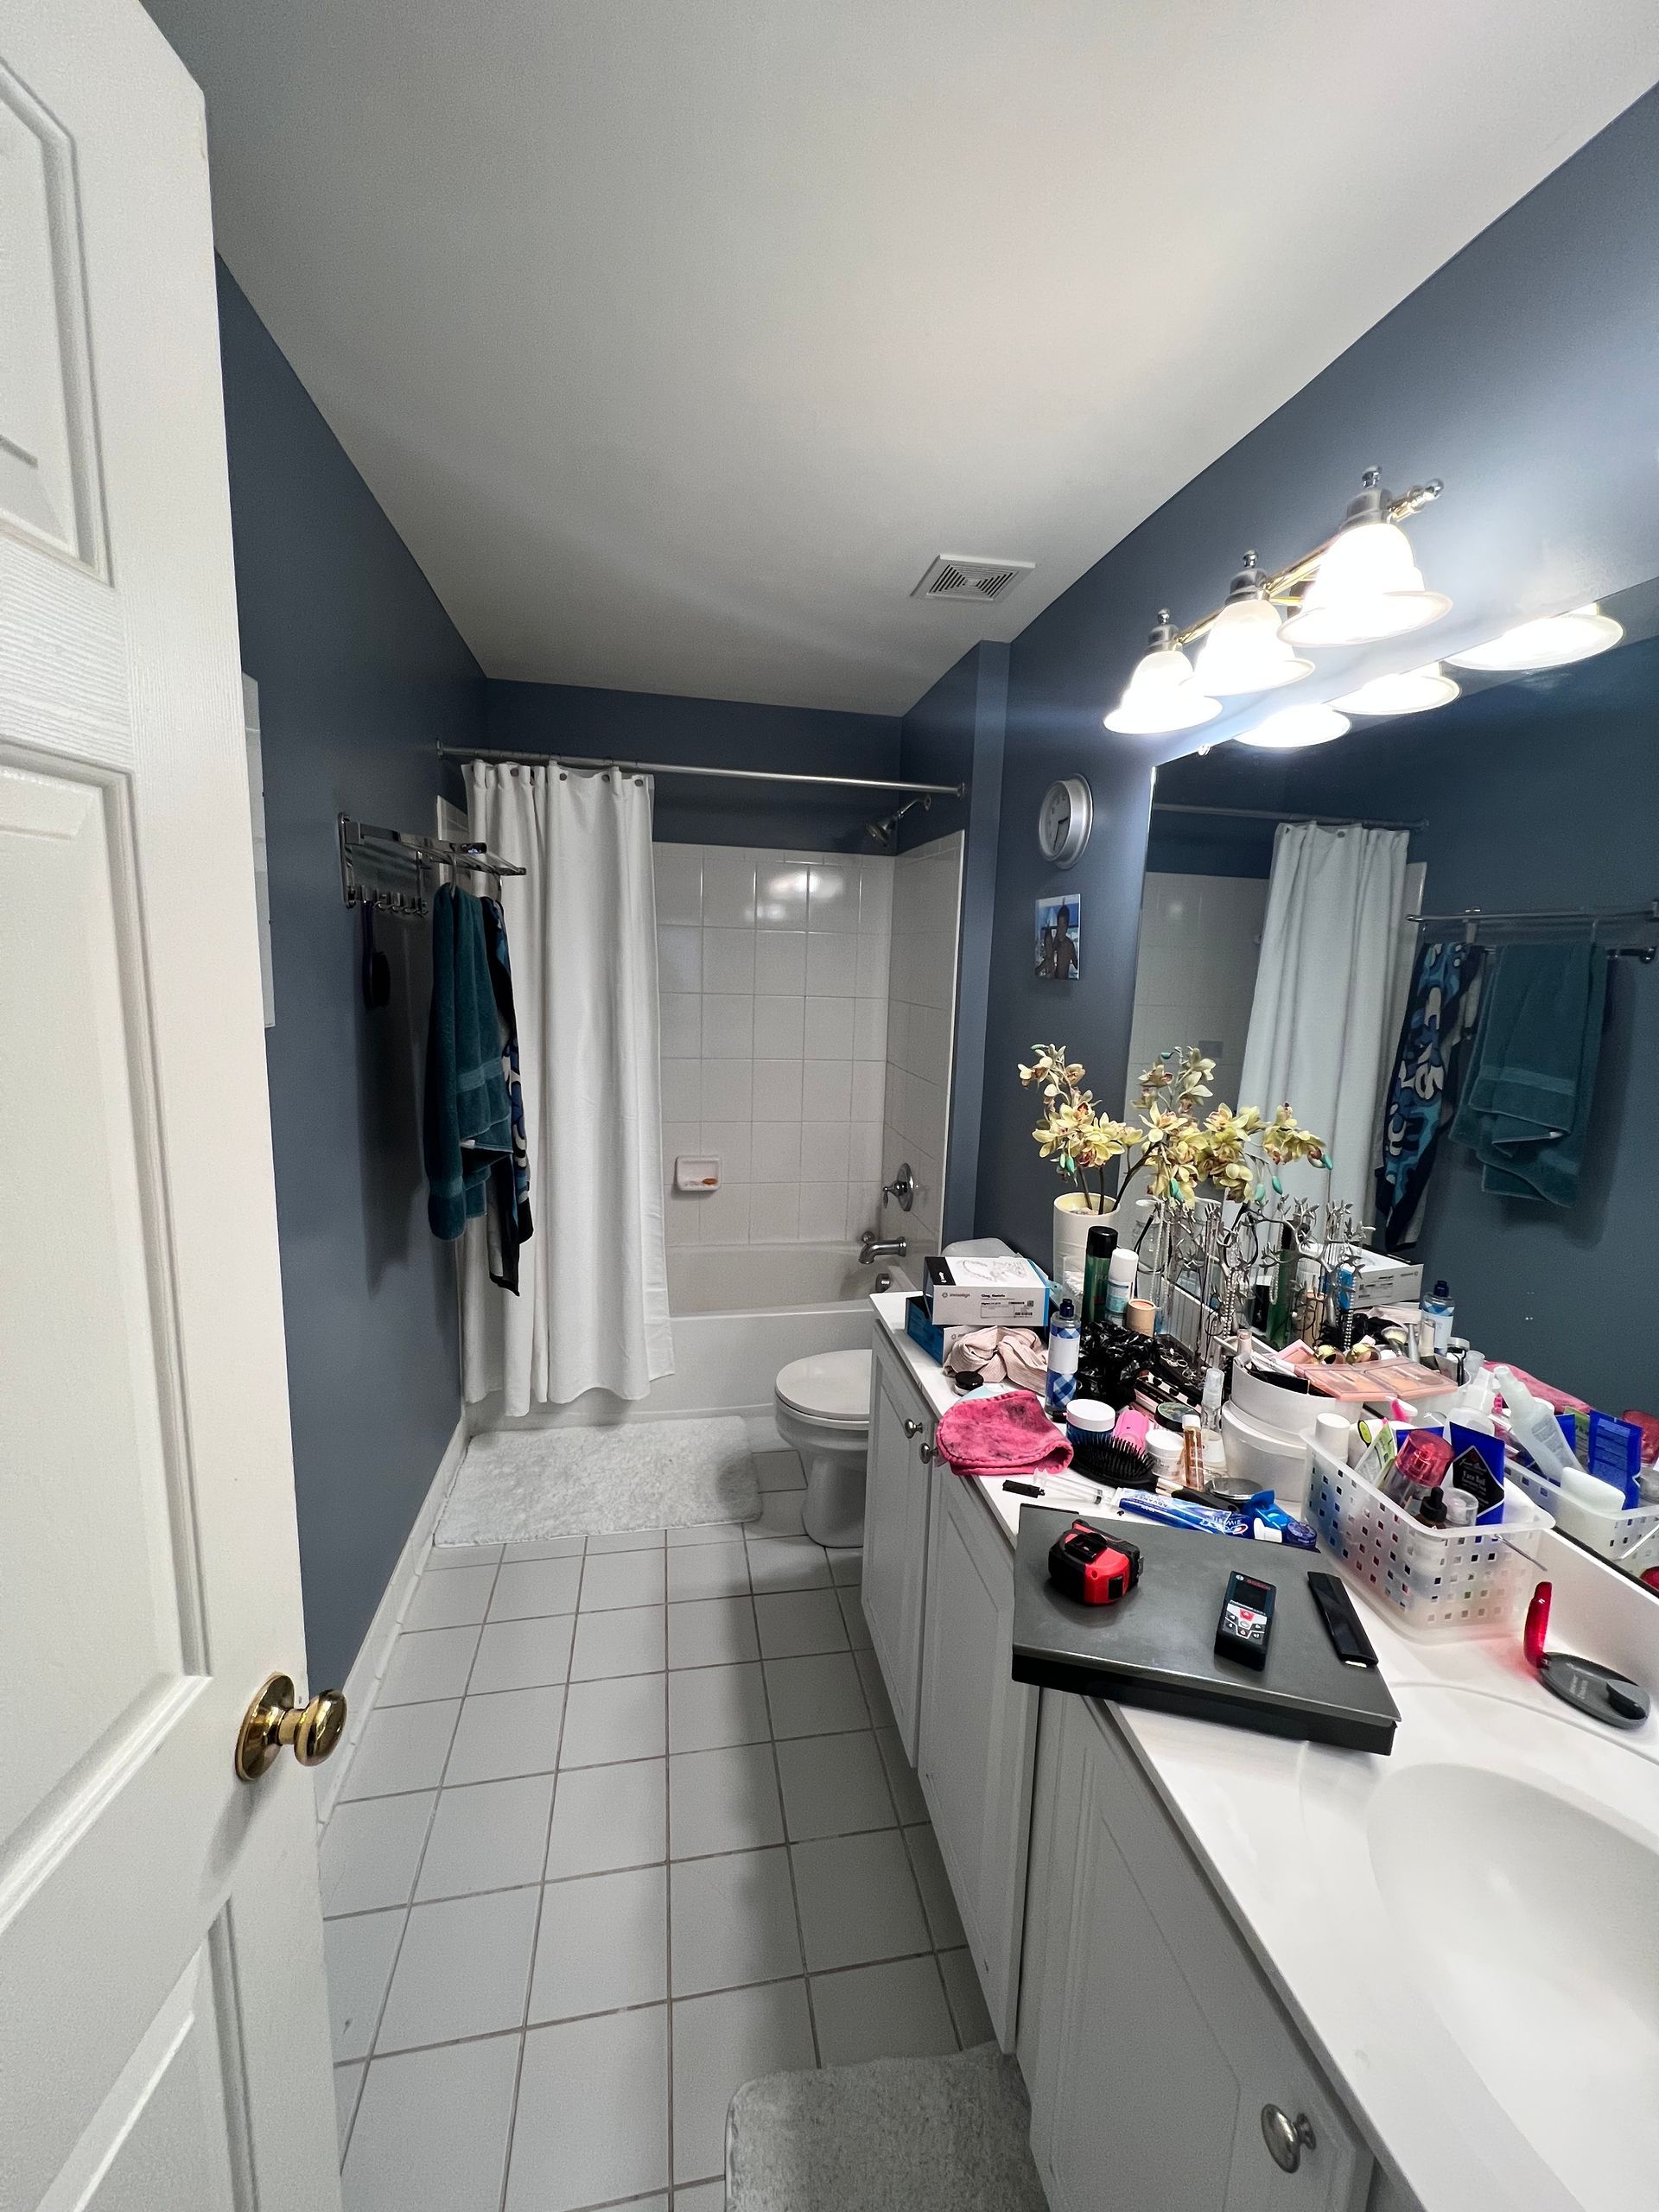 Before and after images for bathroom remodels. BATHROOM design ideas